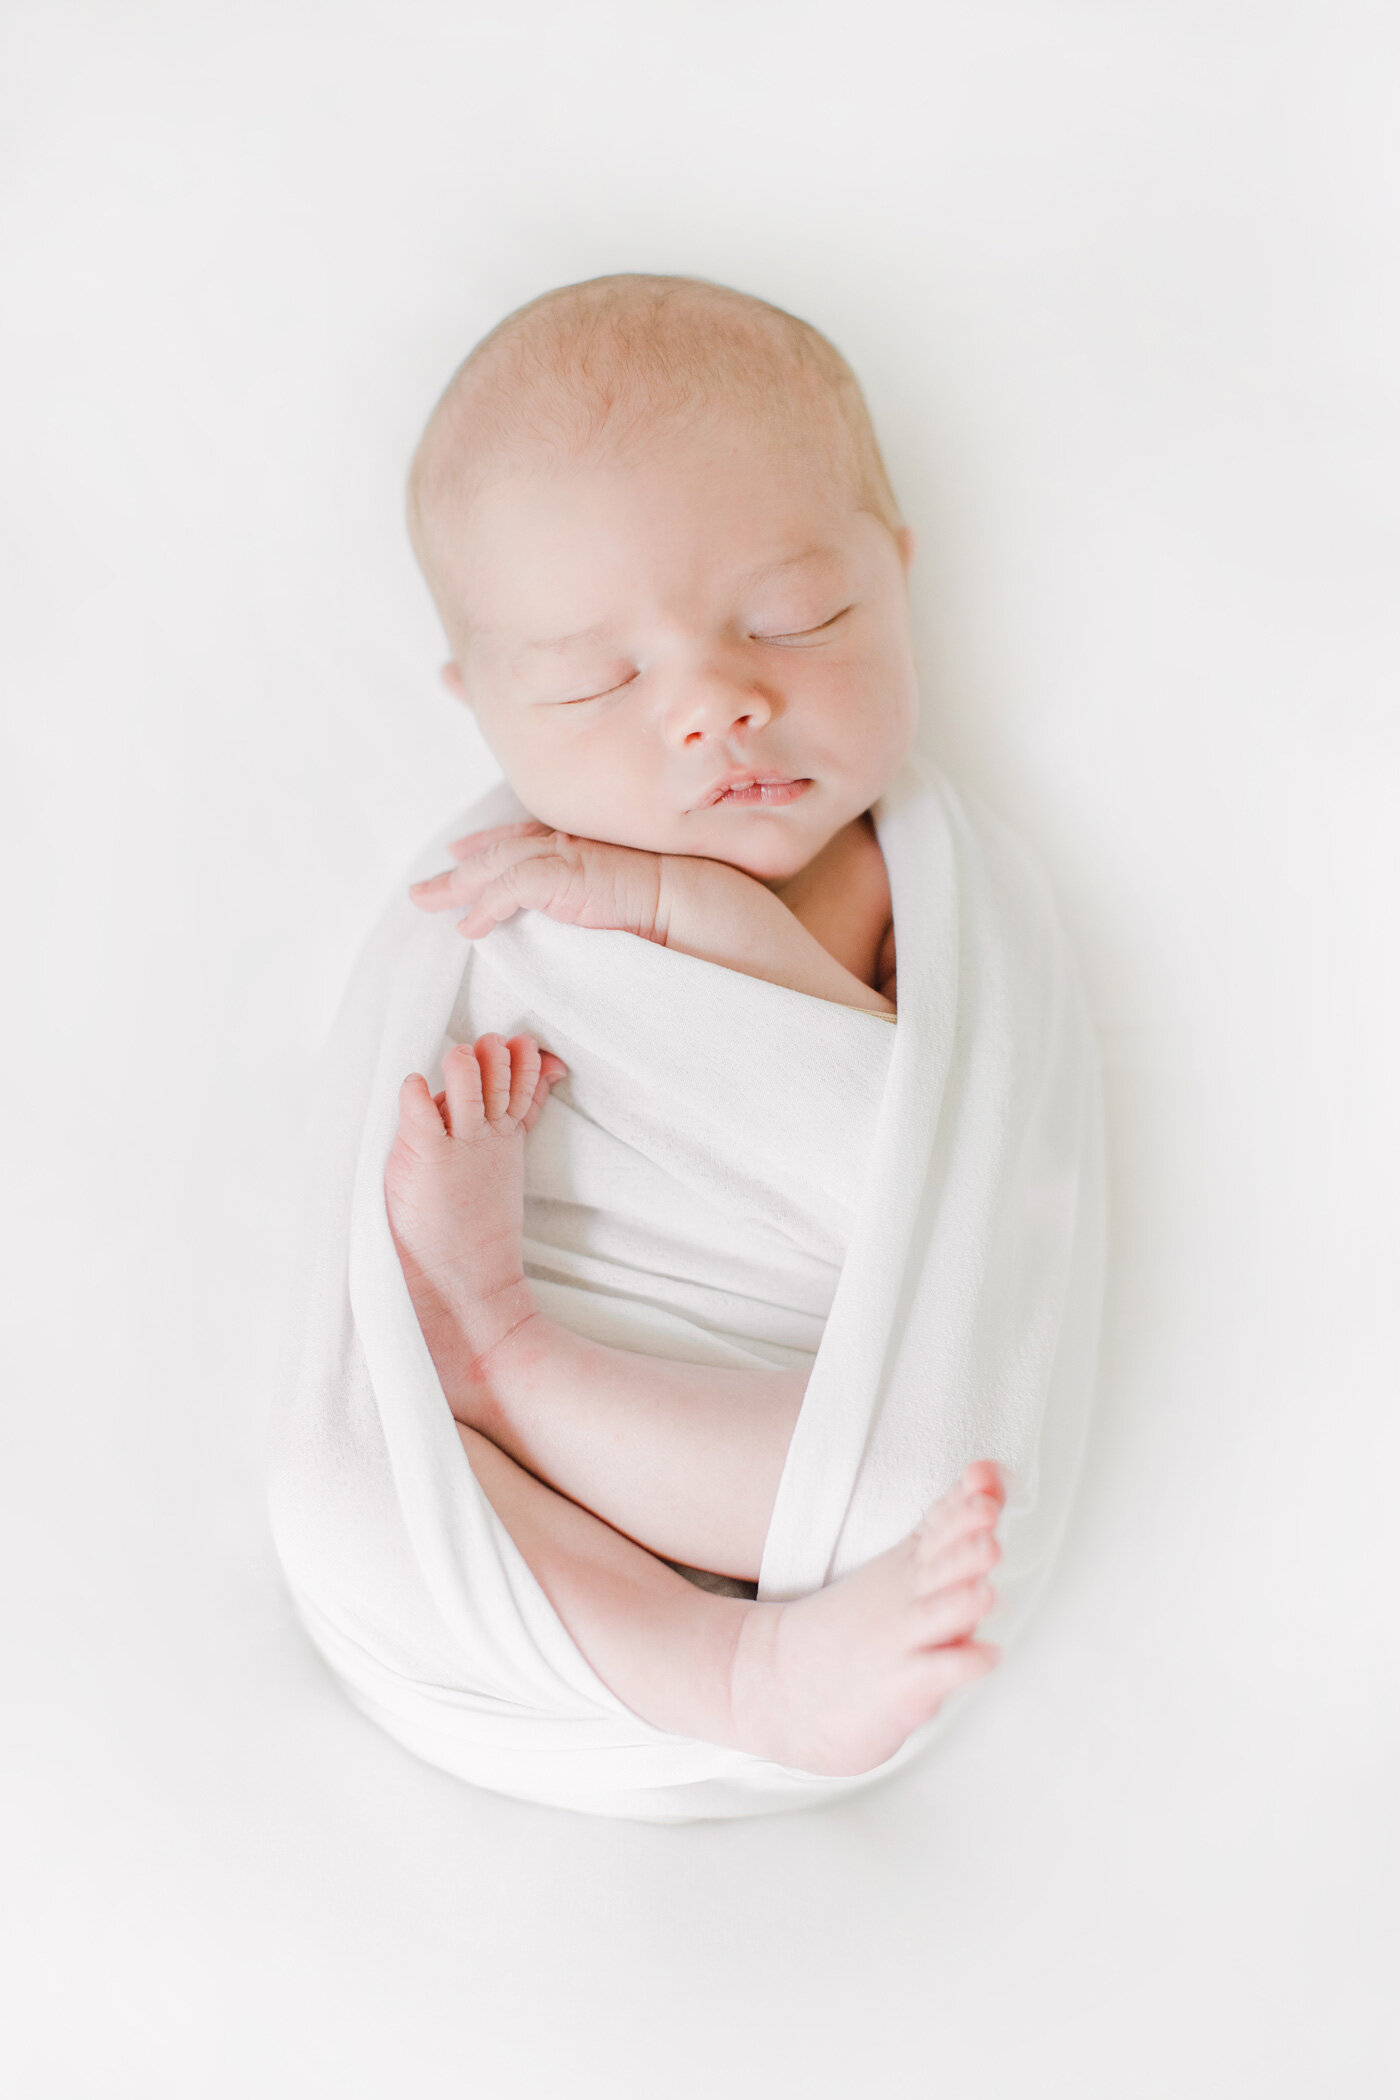 simple classic light and airy newborn photographer